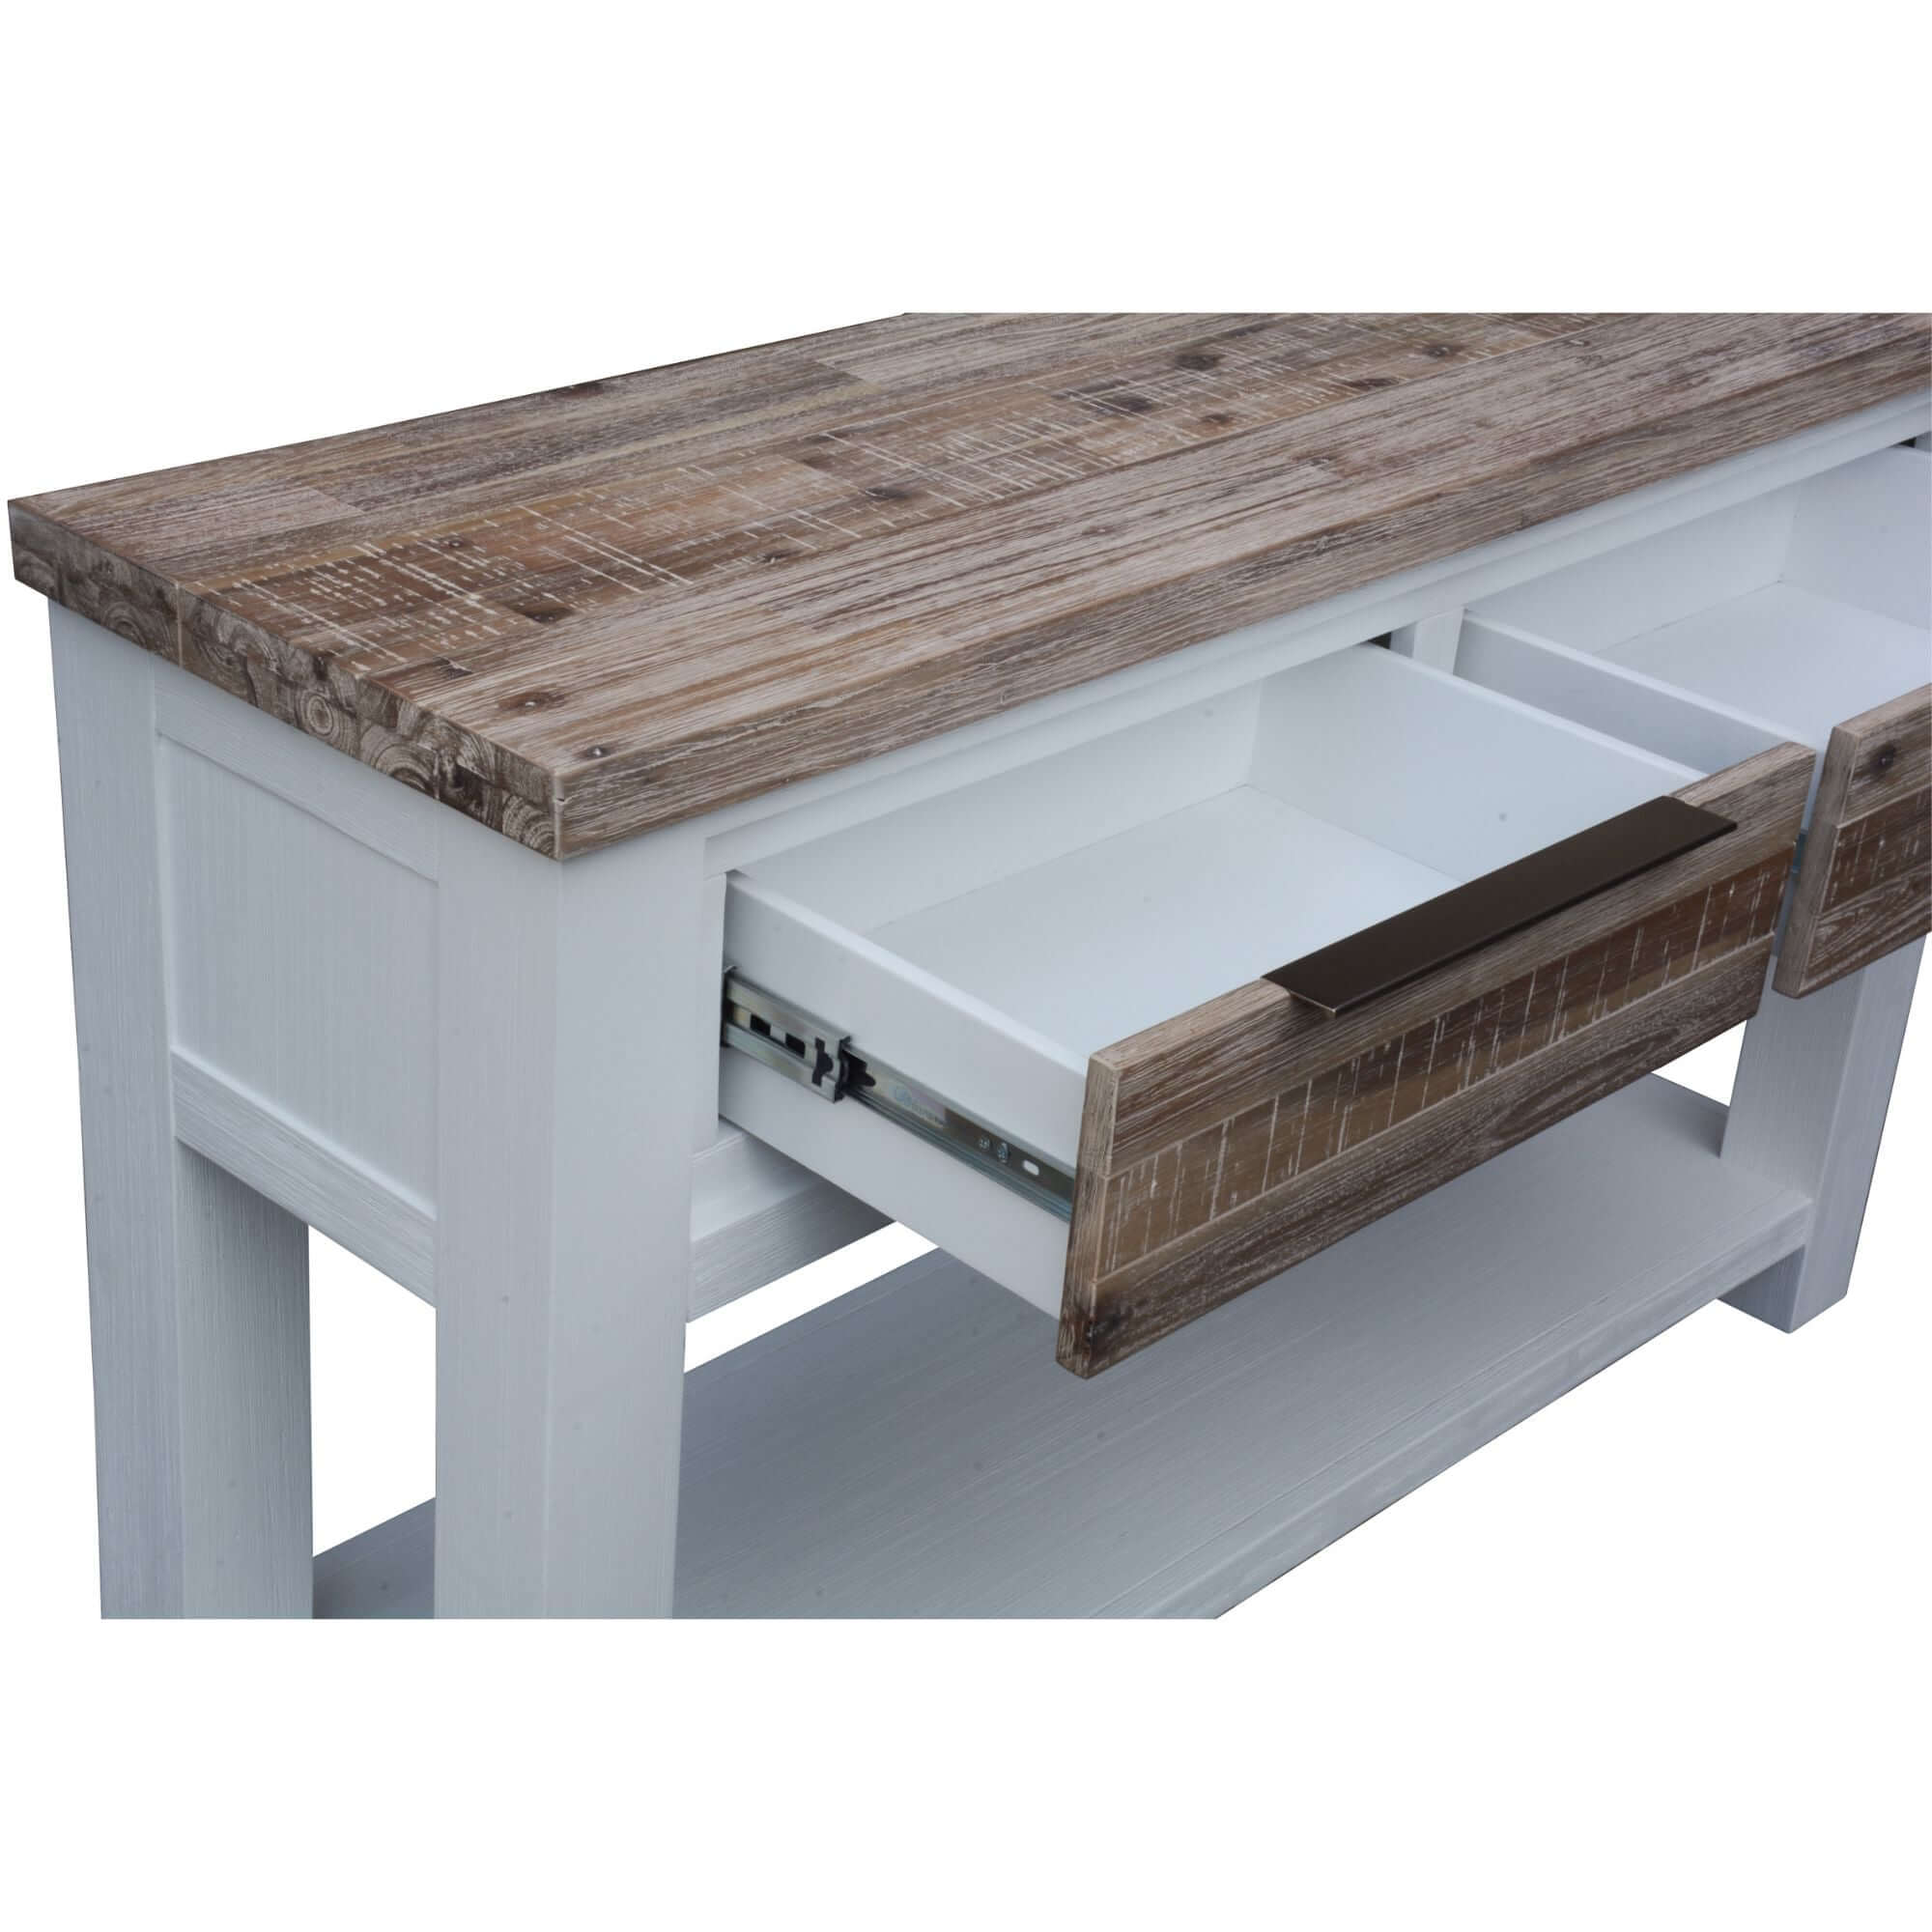 Plumeria Console Hallway Entry Table 130cm Solid Acacia Timber Wood -White Brush-Upinteriors